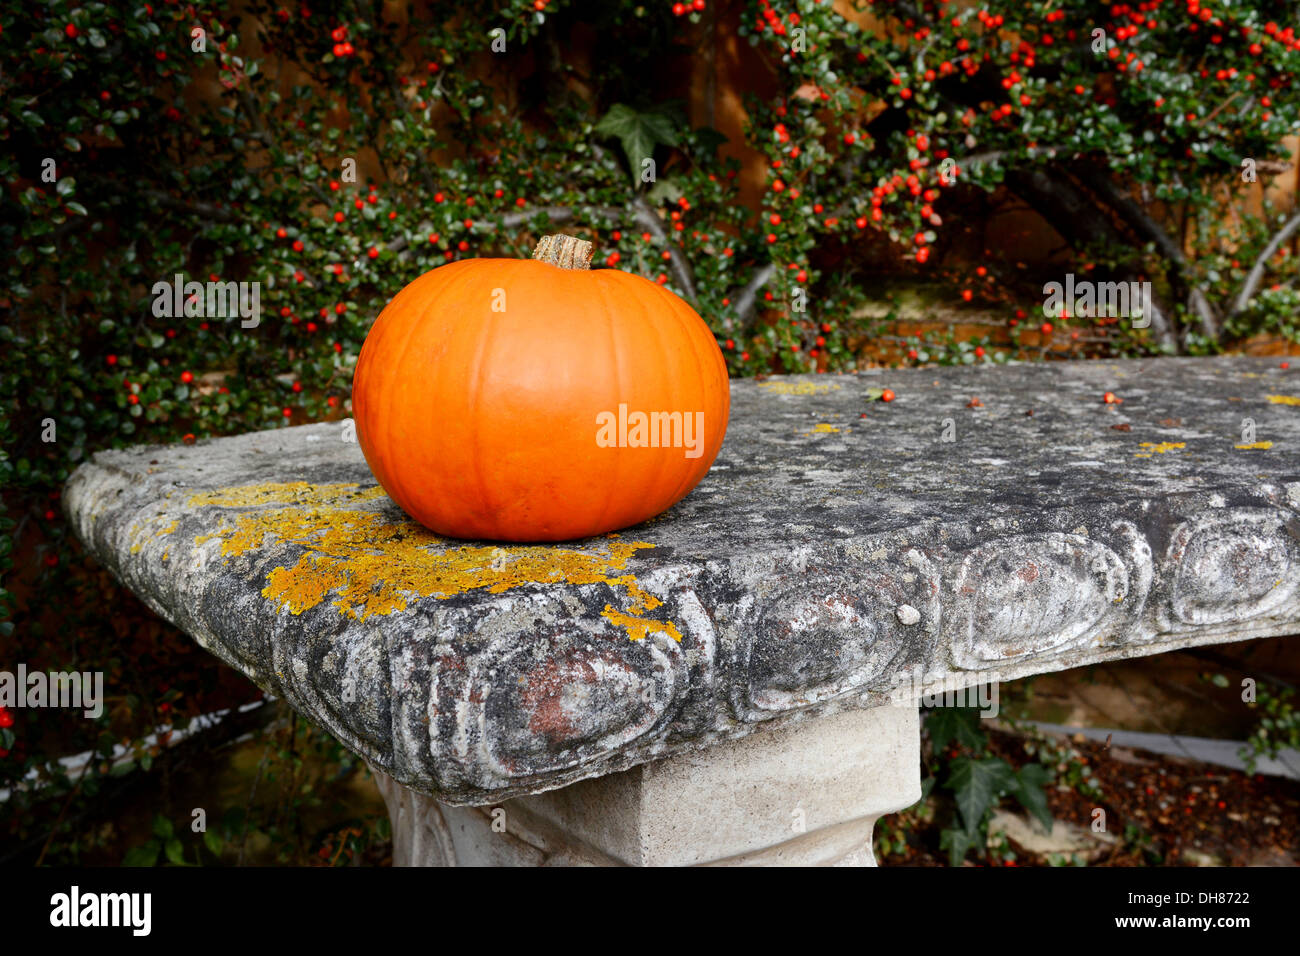 Bright orange gourd on a lichen-covered stone bench with red cotoneaster berries Stock Photo